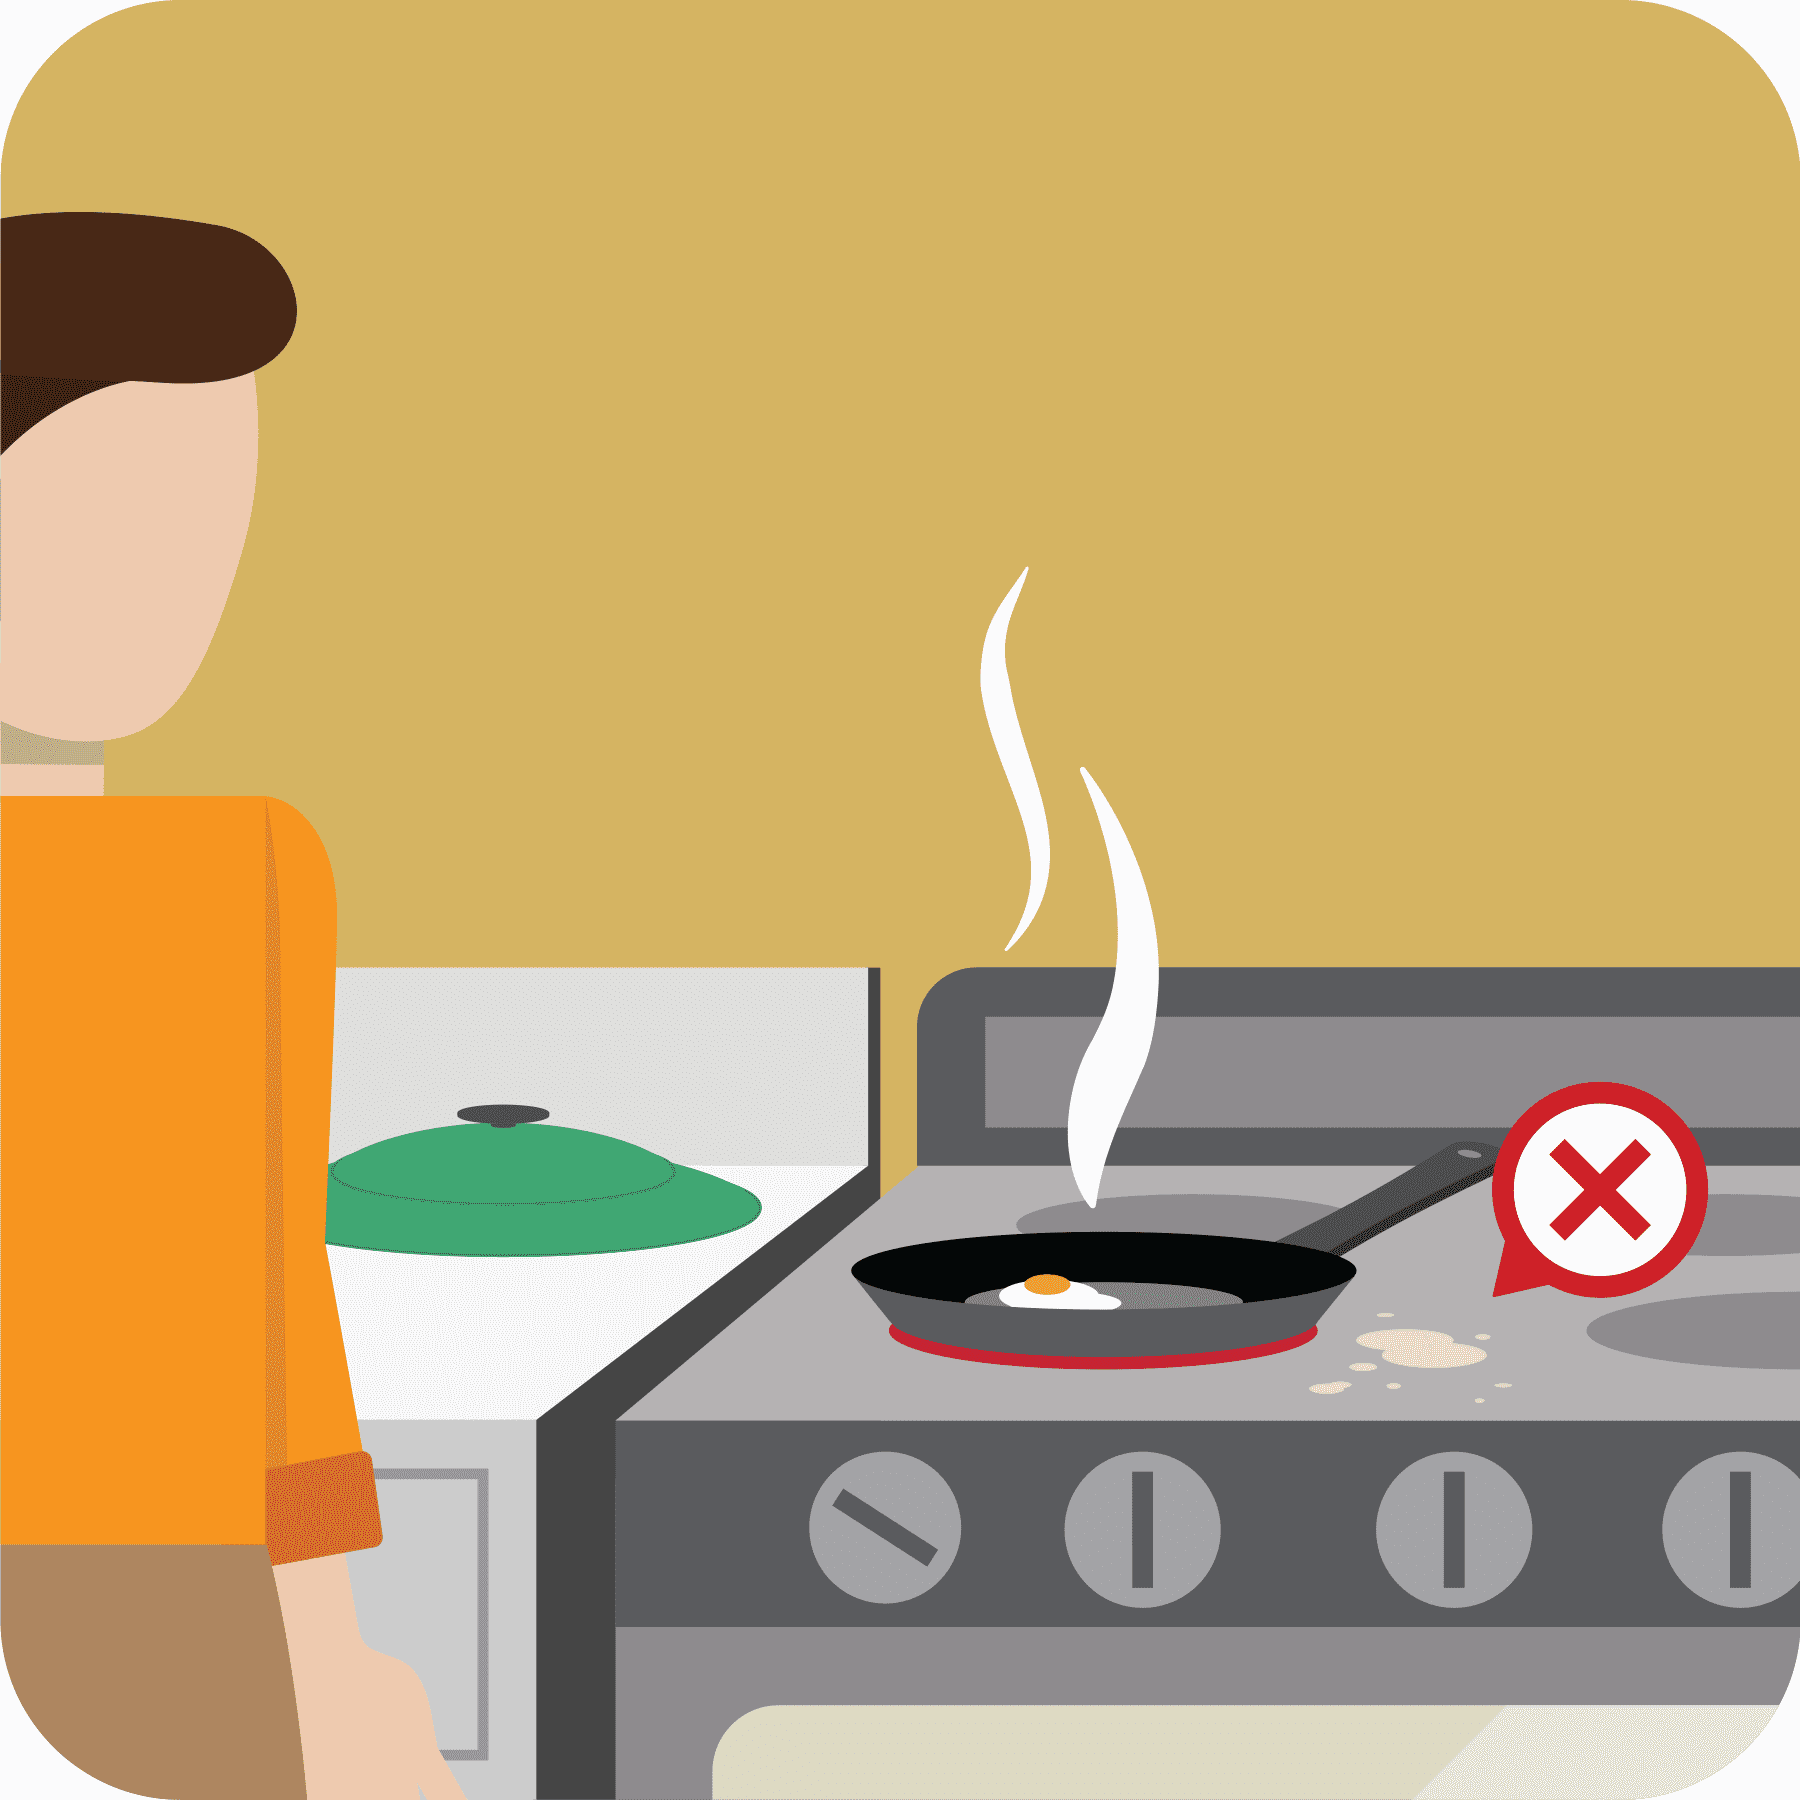 A woman spills food next to a pan cooking food. Red x over the stove.